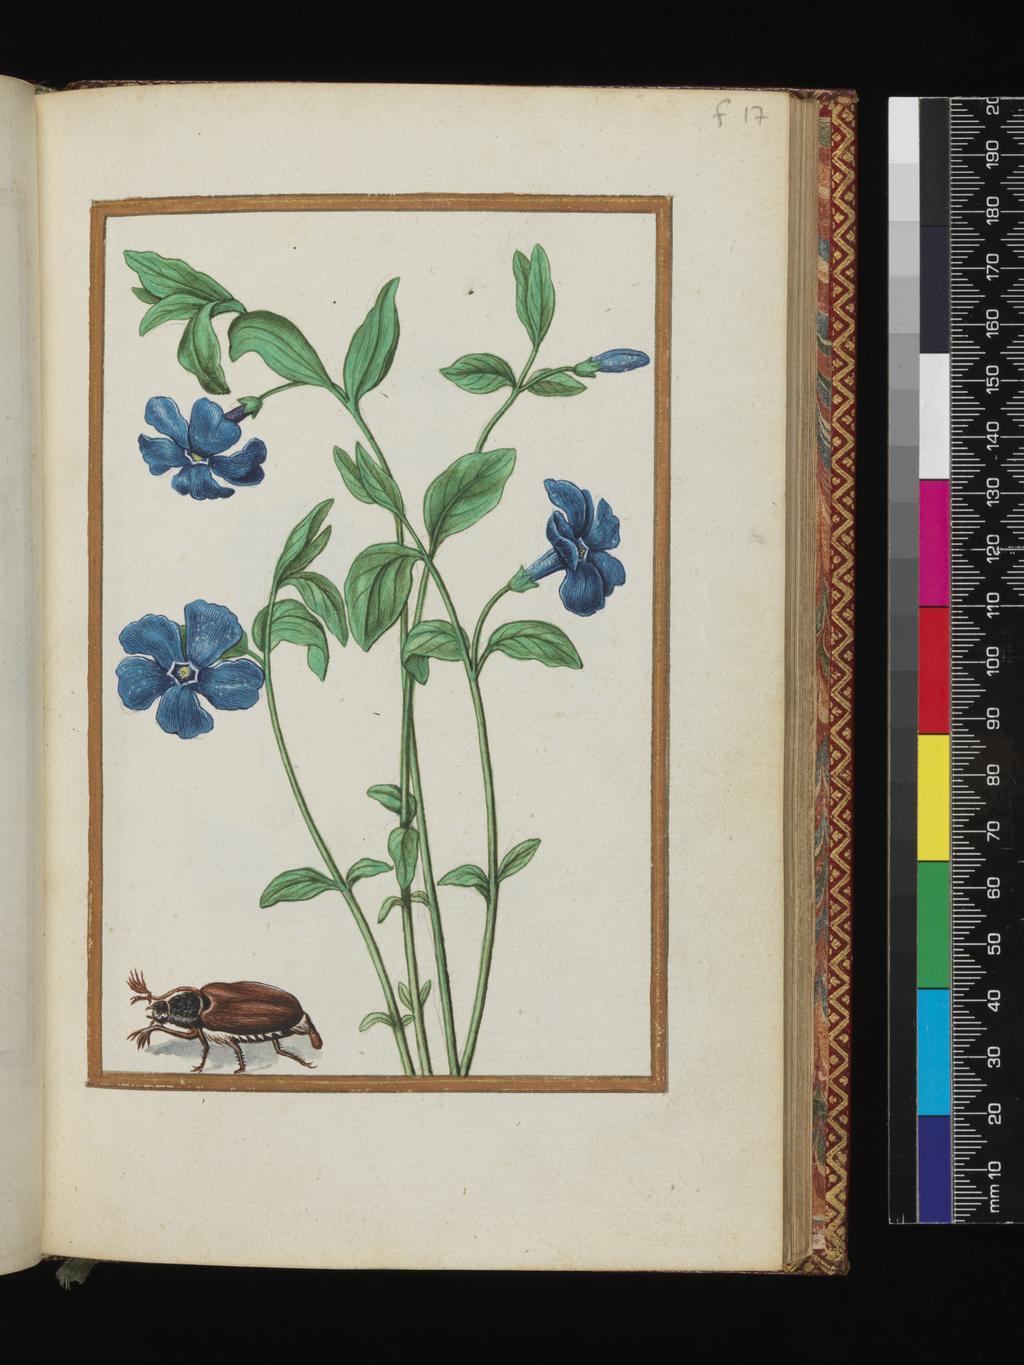 An image of Vinca major. Periwinkle with a beetle. Album containing a dedicatory sonnet and 48 drawings. Pinet, Antoine du (French, op. c. 1584). Each of the drawings is framed by a border of gold paint of varying size according to the depth of the painted area. The drawings on white laid paper, watermarked with a bunch of grapes are bound into an album with a contemporary gold-tooled limp vellum cover bearing the arms, recto and verso of Louise of Lorraine (1553-1601). This, in turn, is bound into an eighteenth century French red morocco gilt binding. The spine is lettered in gold (see 'inscriptions/marks'). Each of the drawings is framed by a border of gold paint of varying size according to the depth of the painted area. Blank ff not detailed elsewhere. Height, sheet size, 204 mm, width, sheet size, 139 mm.